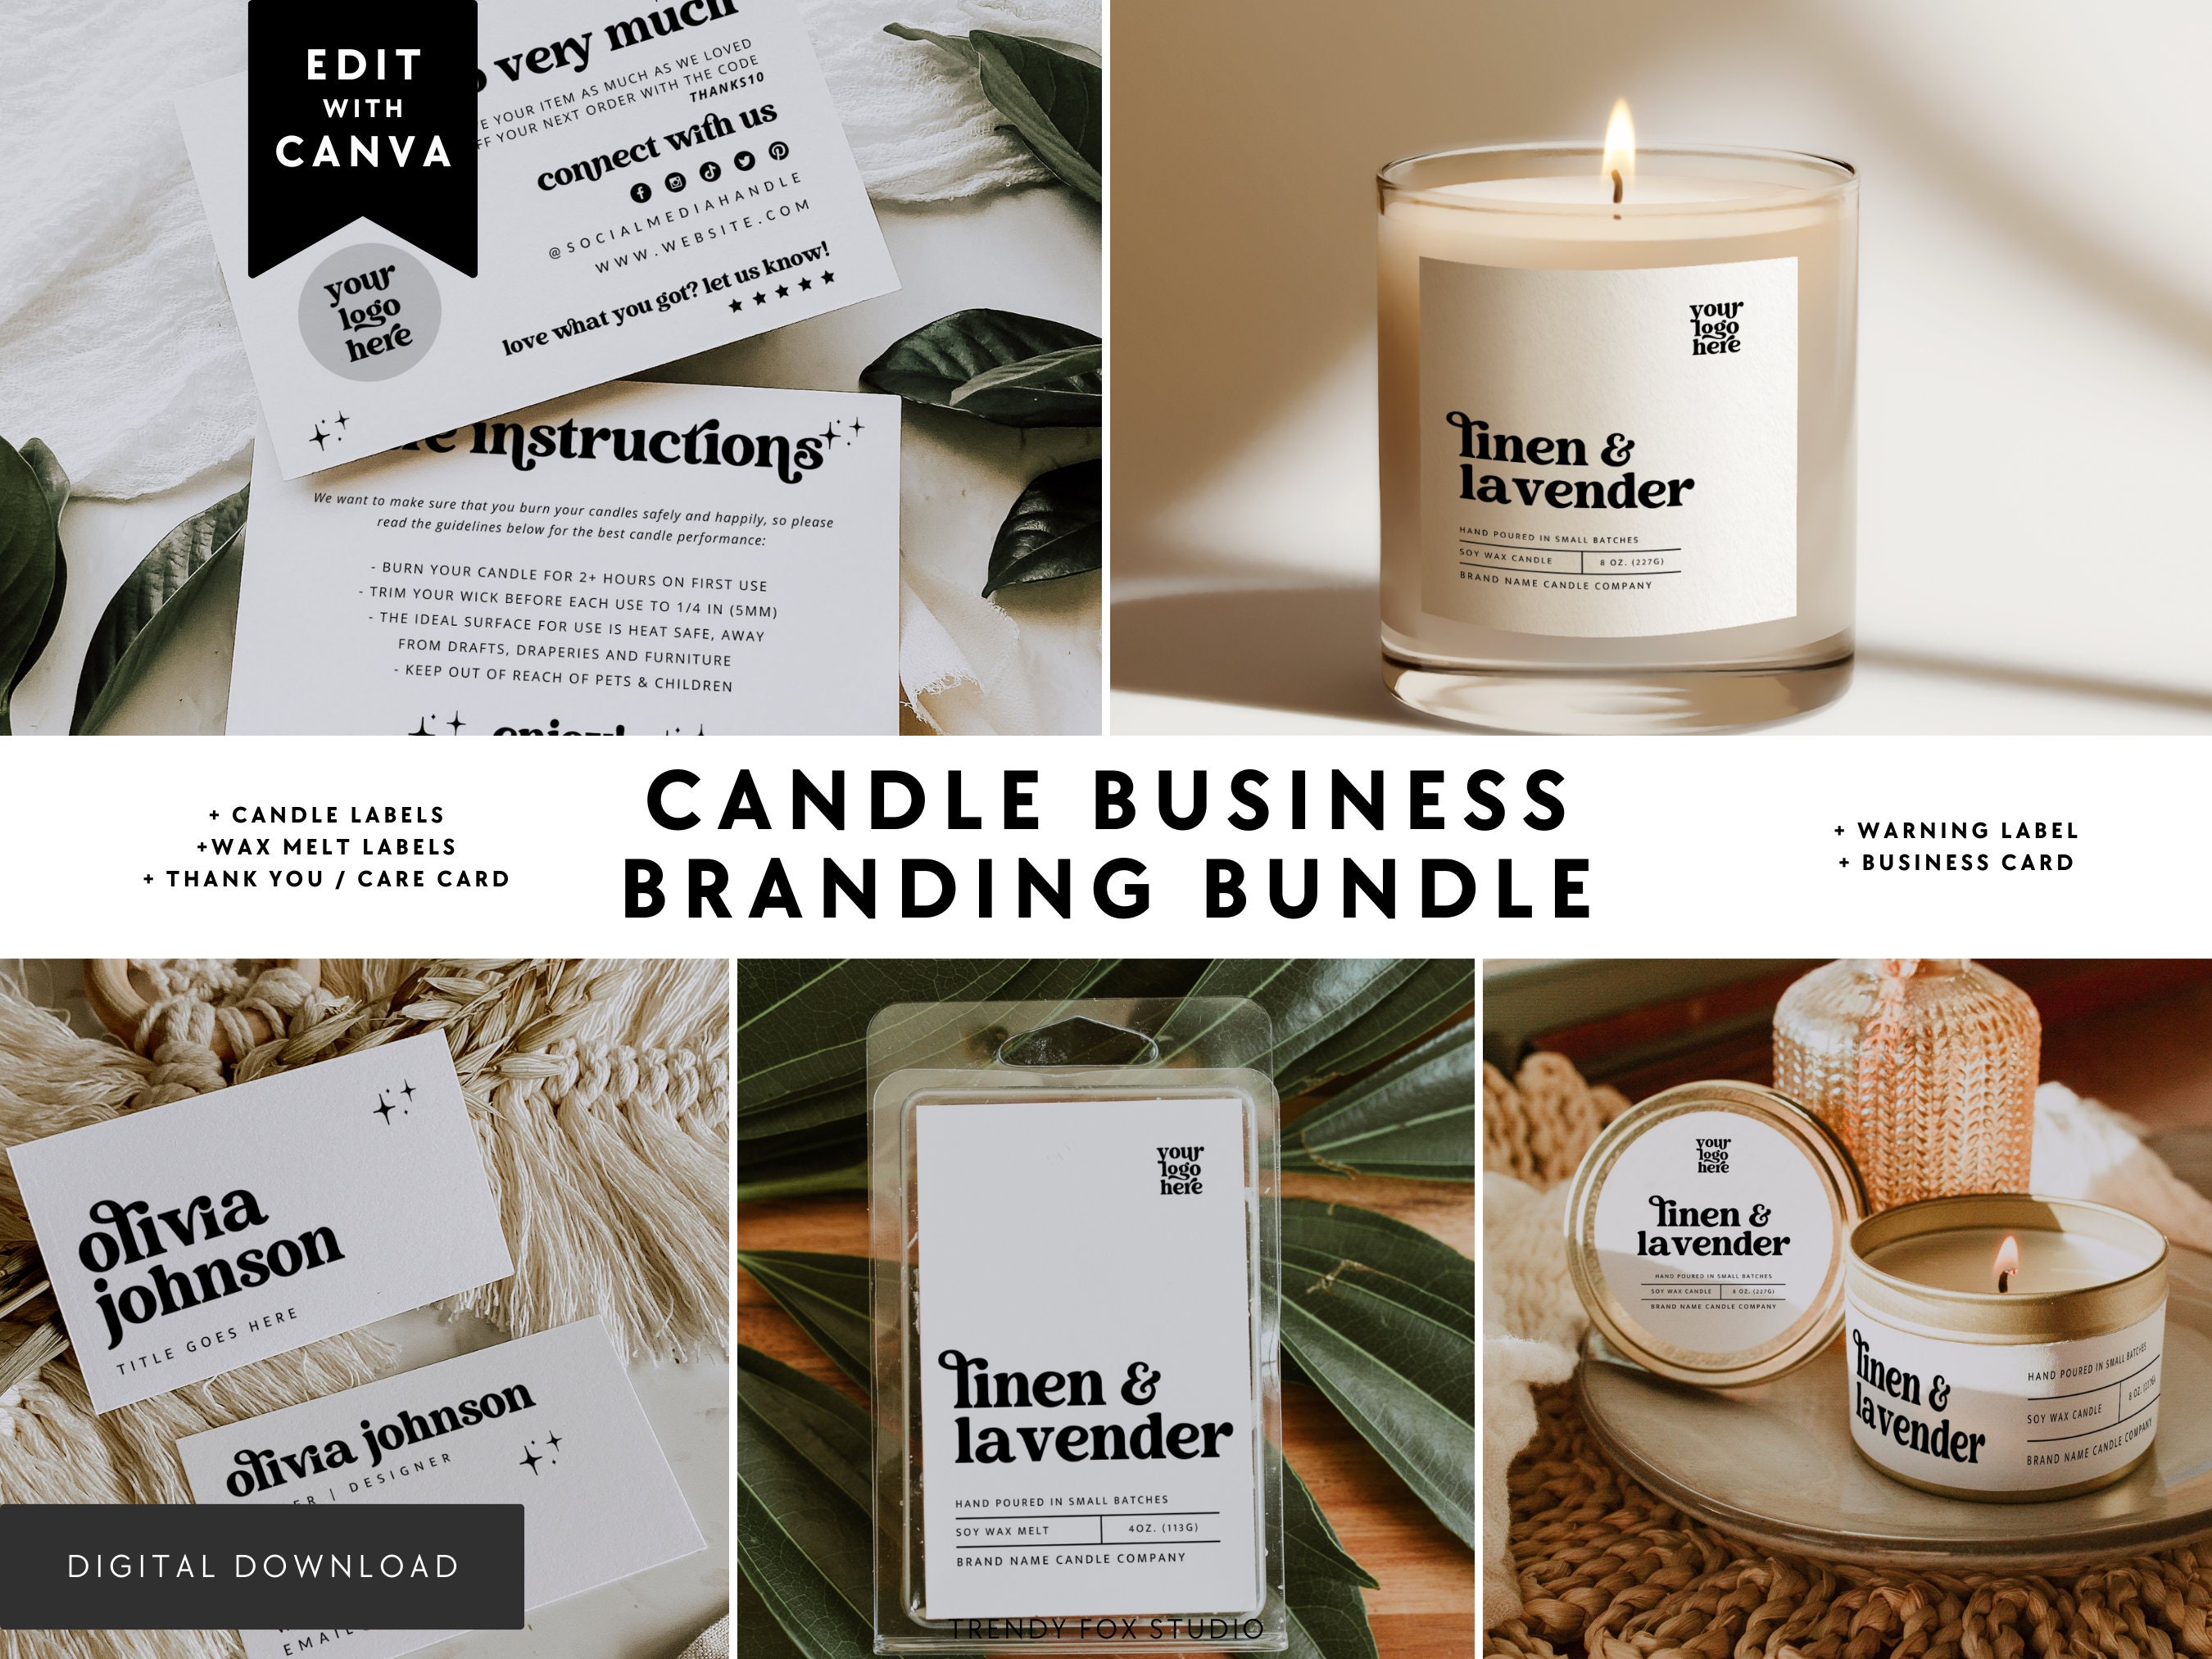 Candle & Wax Melt Warning Label Template DIGITAL DOWNLOAD Editable CANVA  Template Design 2 Circle Template 